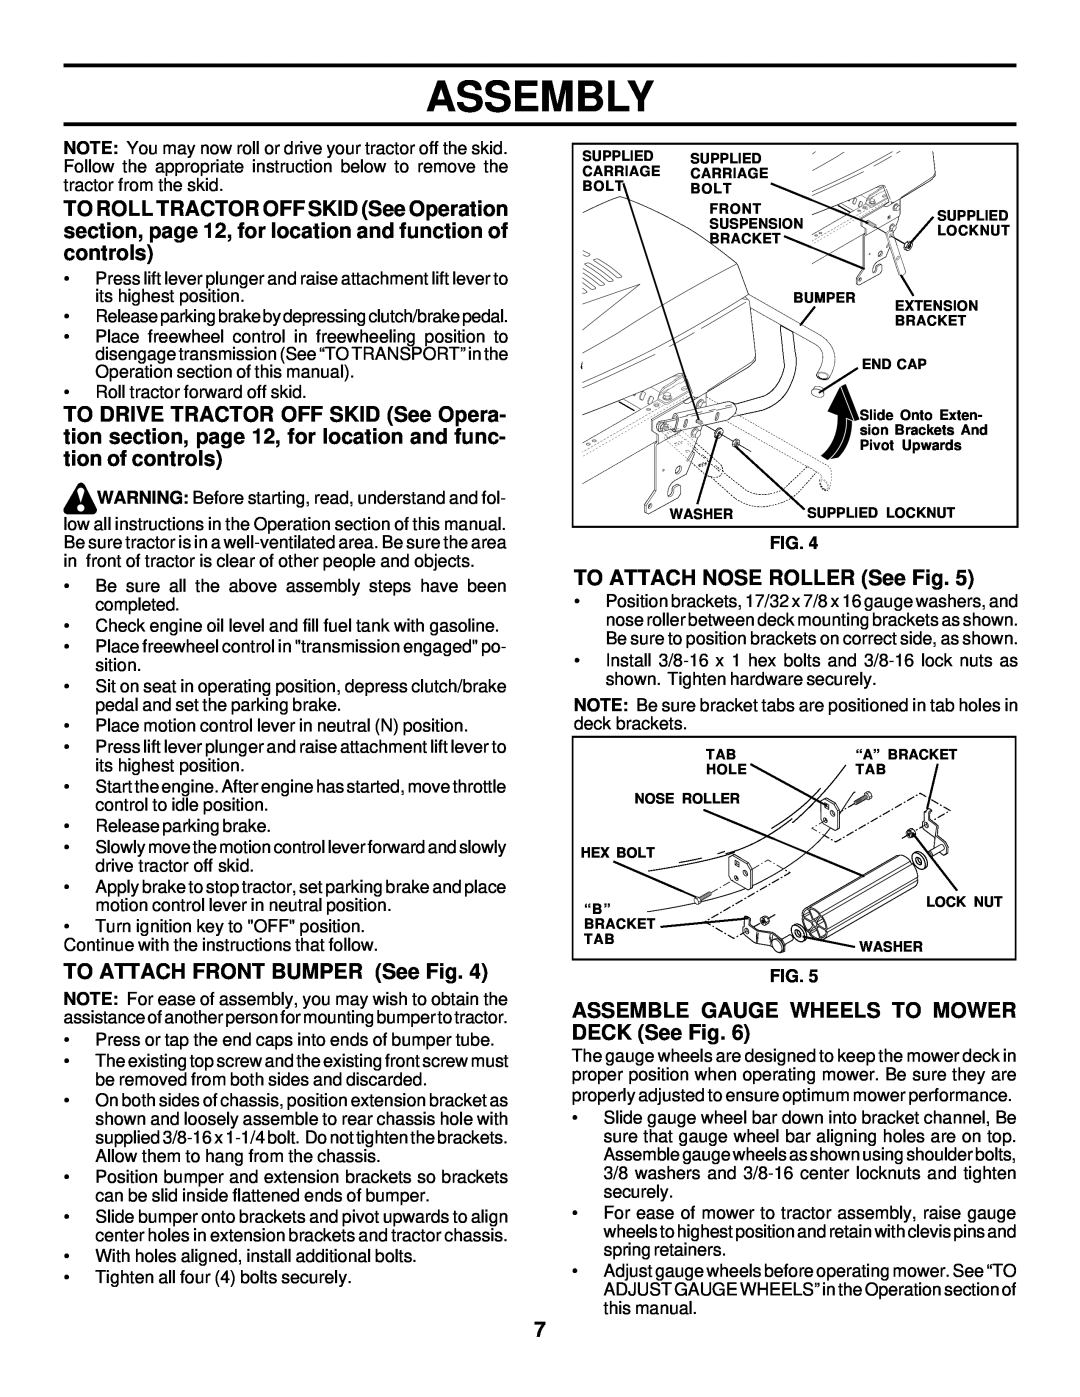 Husqvarna GTH225 owner manual TO ATTACH FRONT BUMPER See Fig, TO ATTACH NOSE ROLLER See Fig, Assembly 